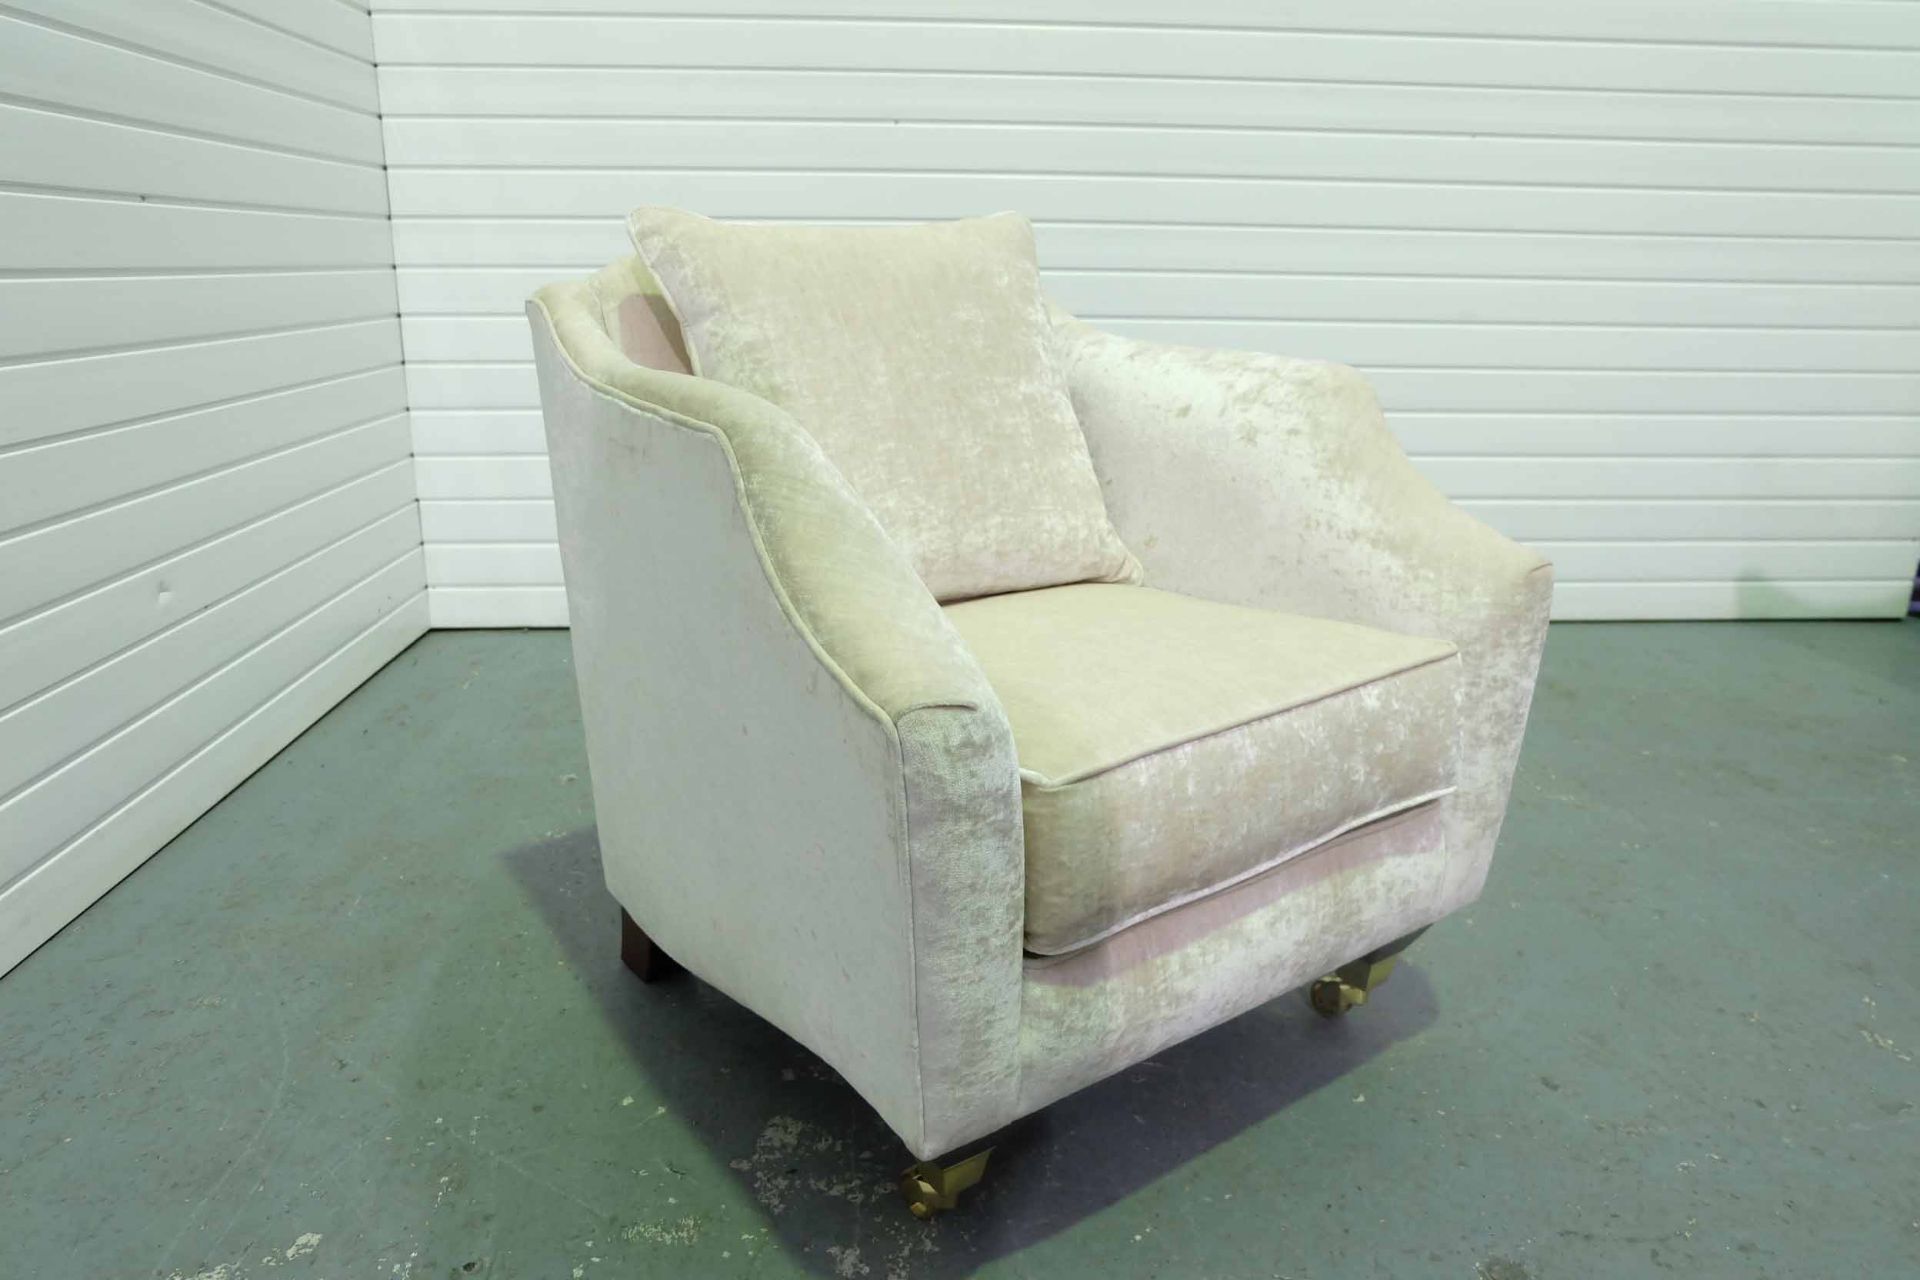 Steed Upholstery 'Hockley' Range Fully Handmade Chair. With Castor Wheels to the Front of the Chair. - Image 3 of 4